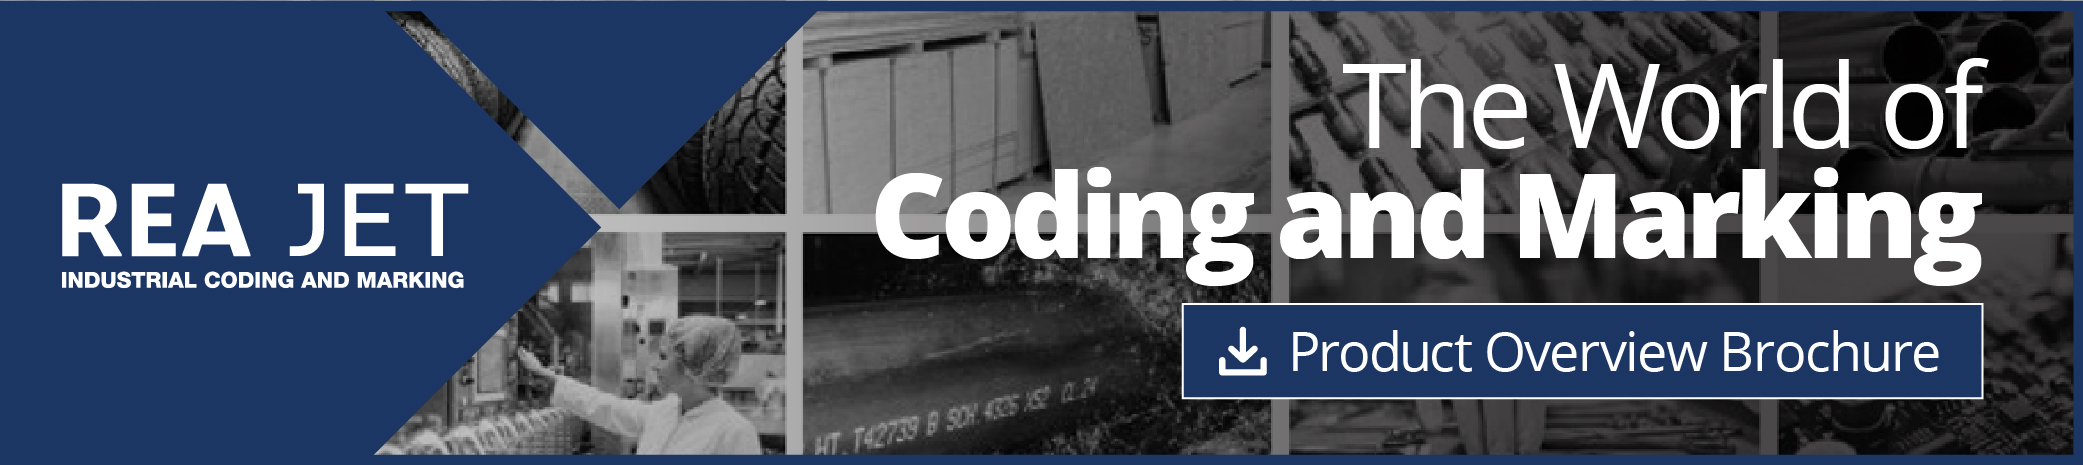 The World of Coding and Marking